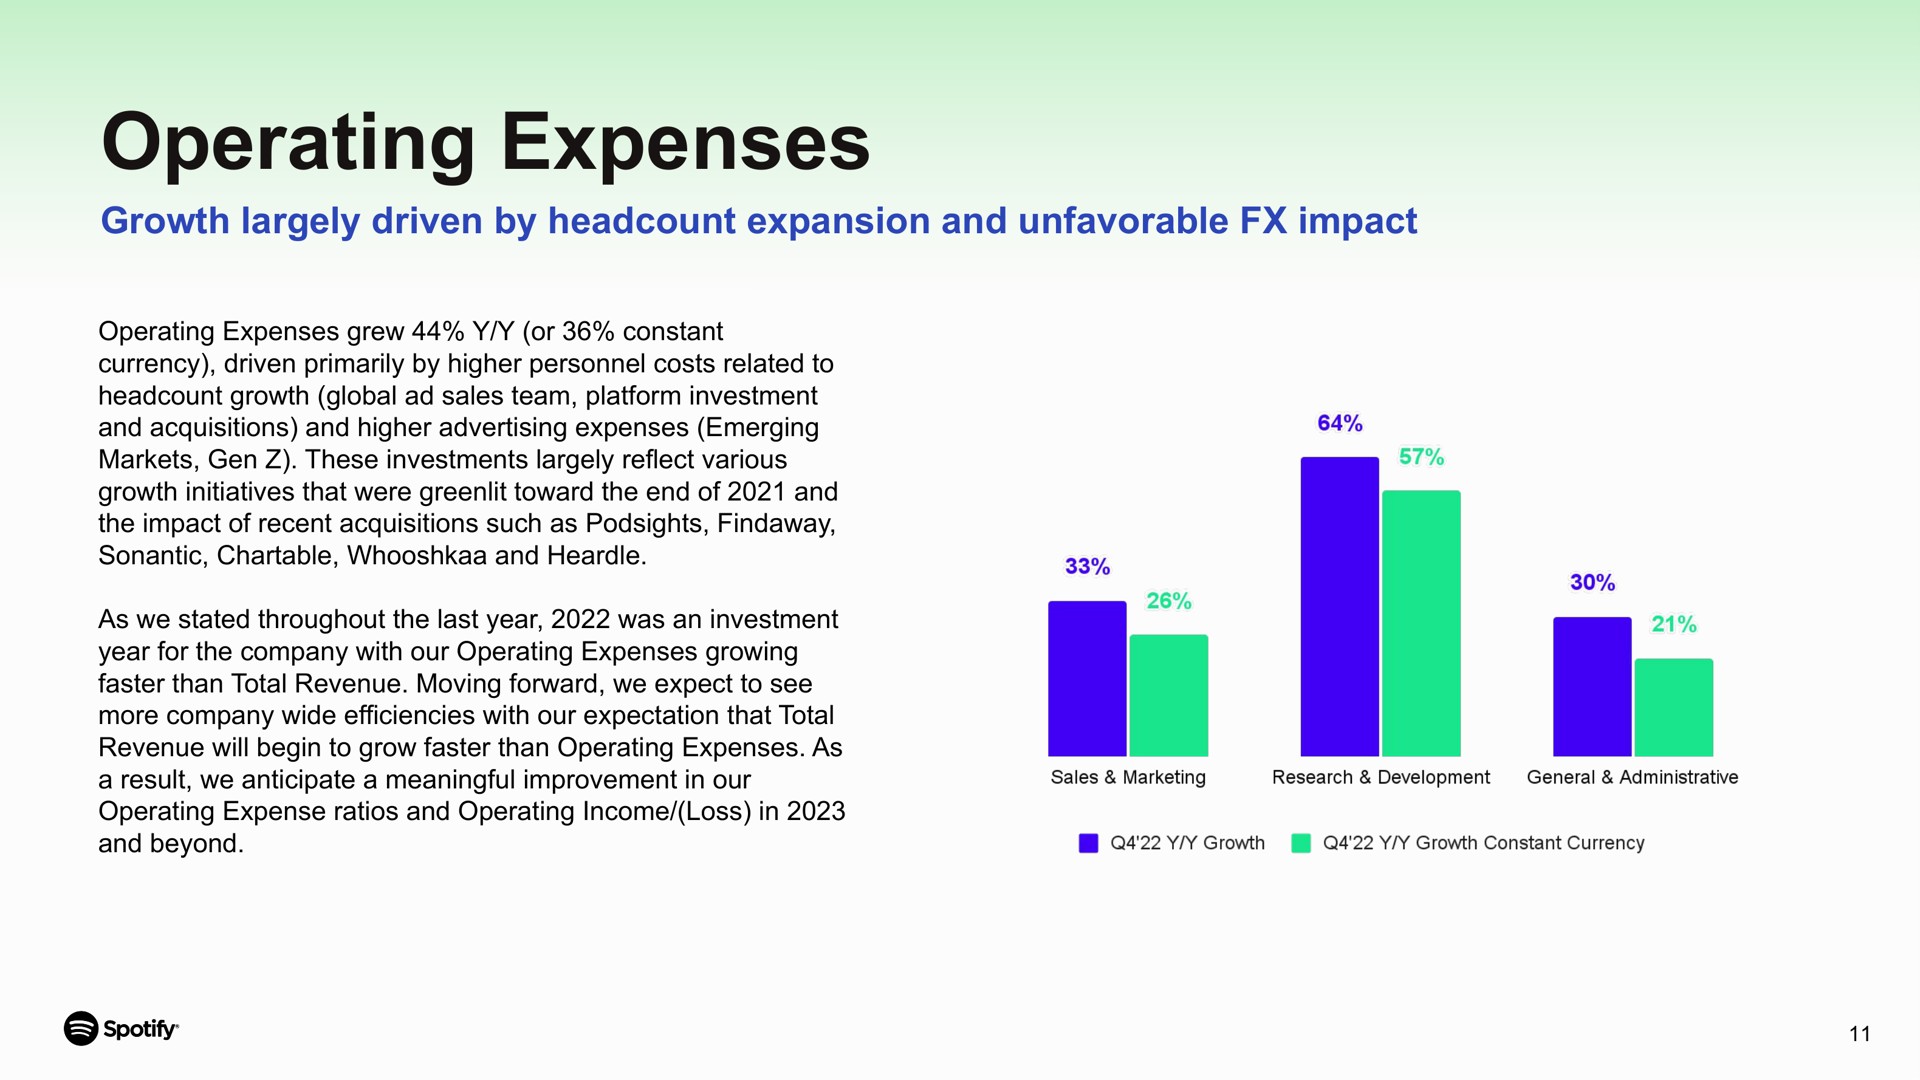 operating expenses growth largely driven by expansion and unfavorable impact grew or constant currency primarily higher personnel costs related to acquisitions higher advertising emerging initiatives that were toward the end of as we stated throughout the last year was an investment faster than total revenue moving forward we expect to see expense ratios income loss in spotty | Spotify